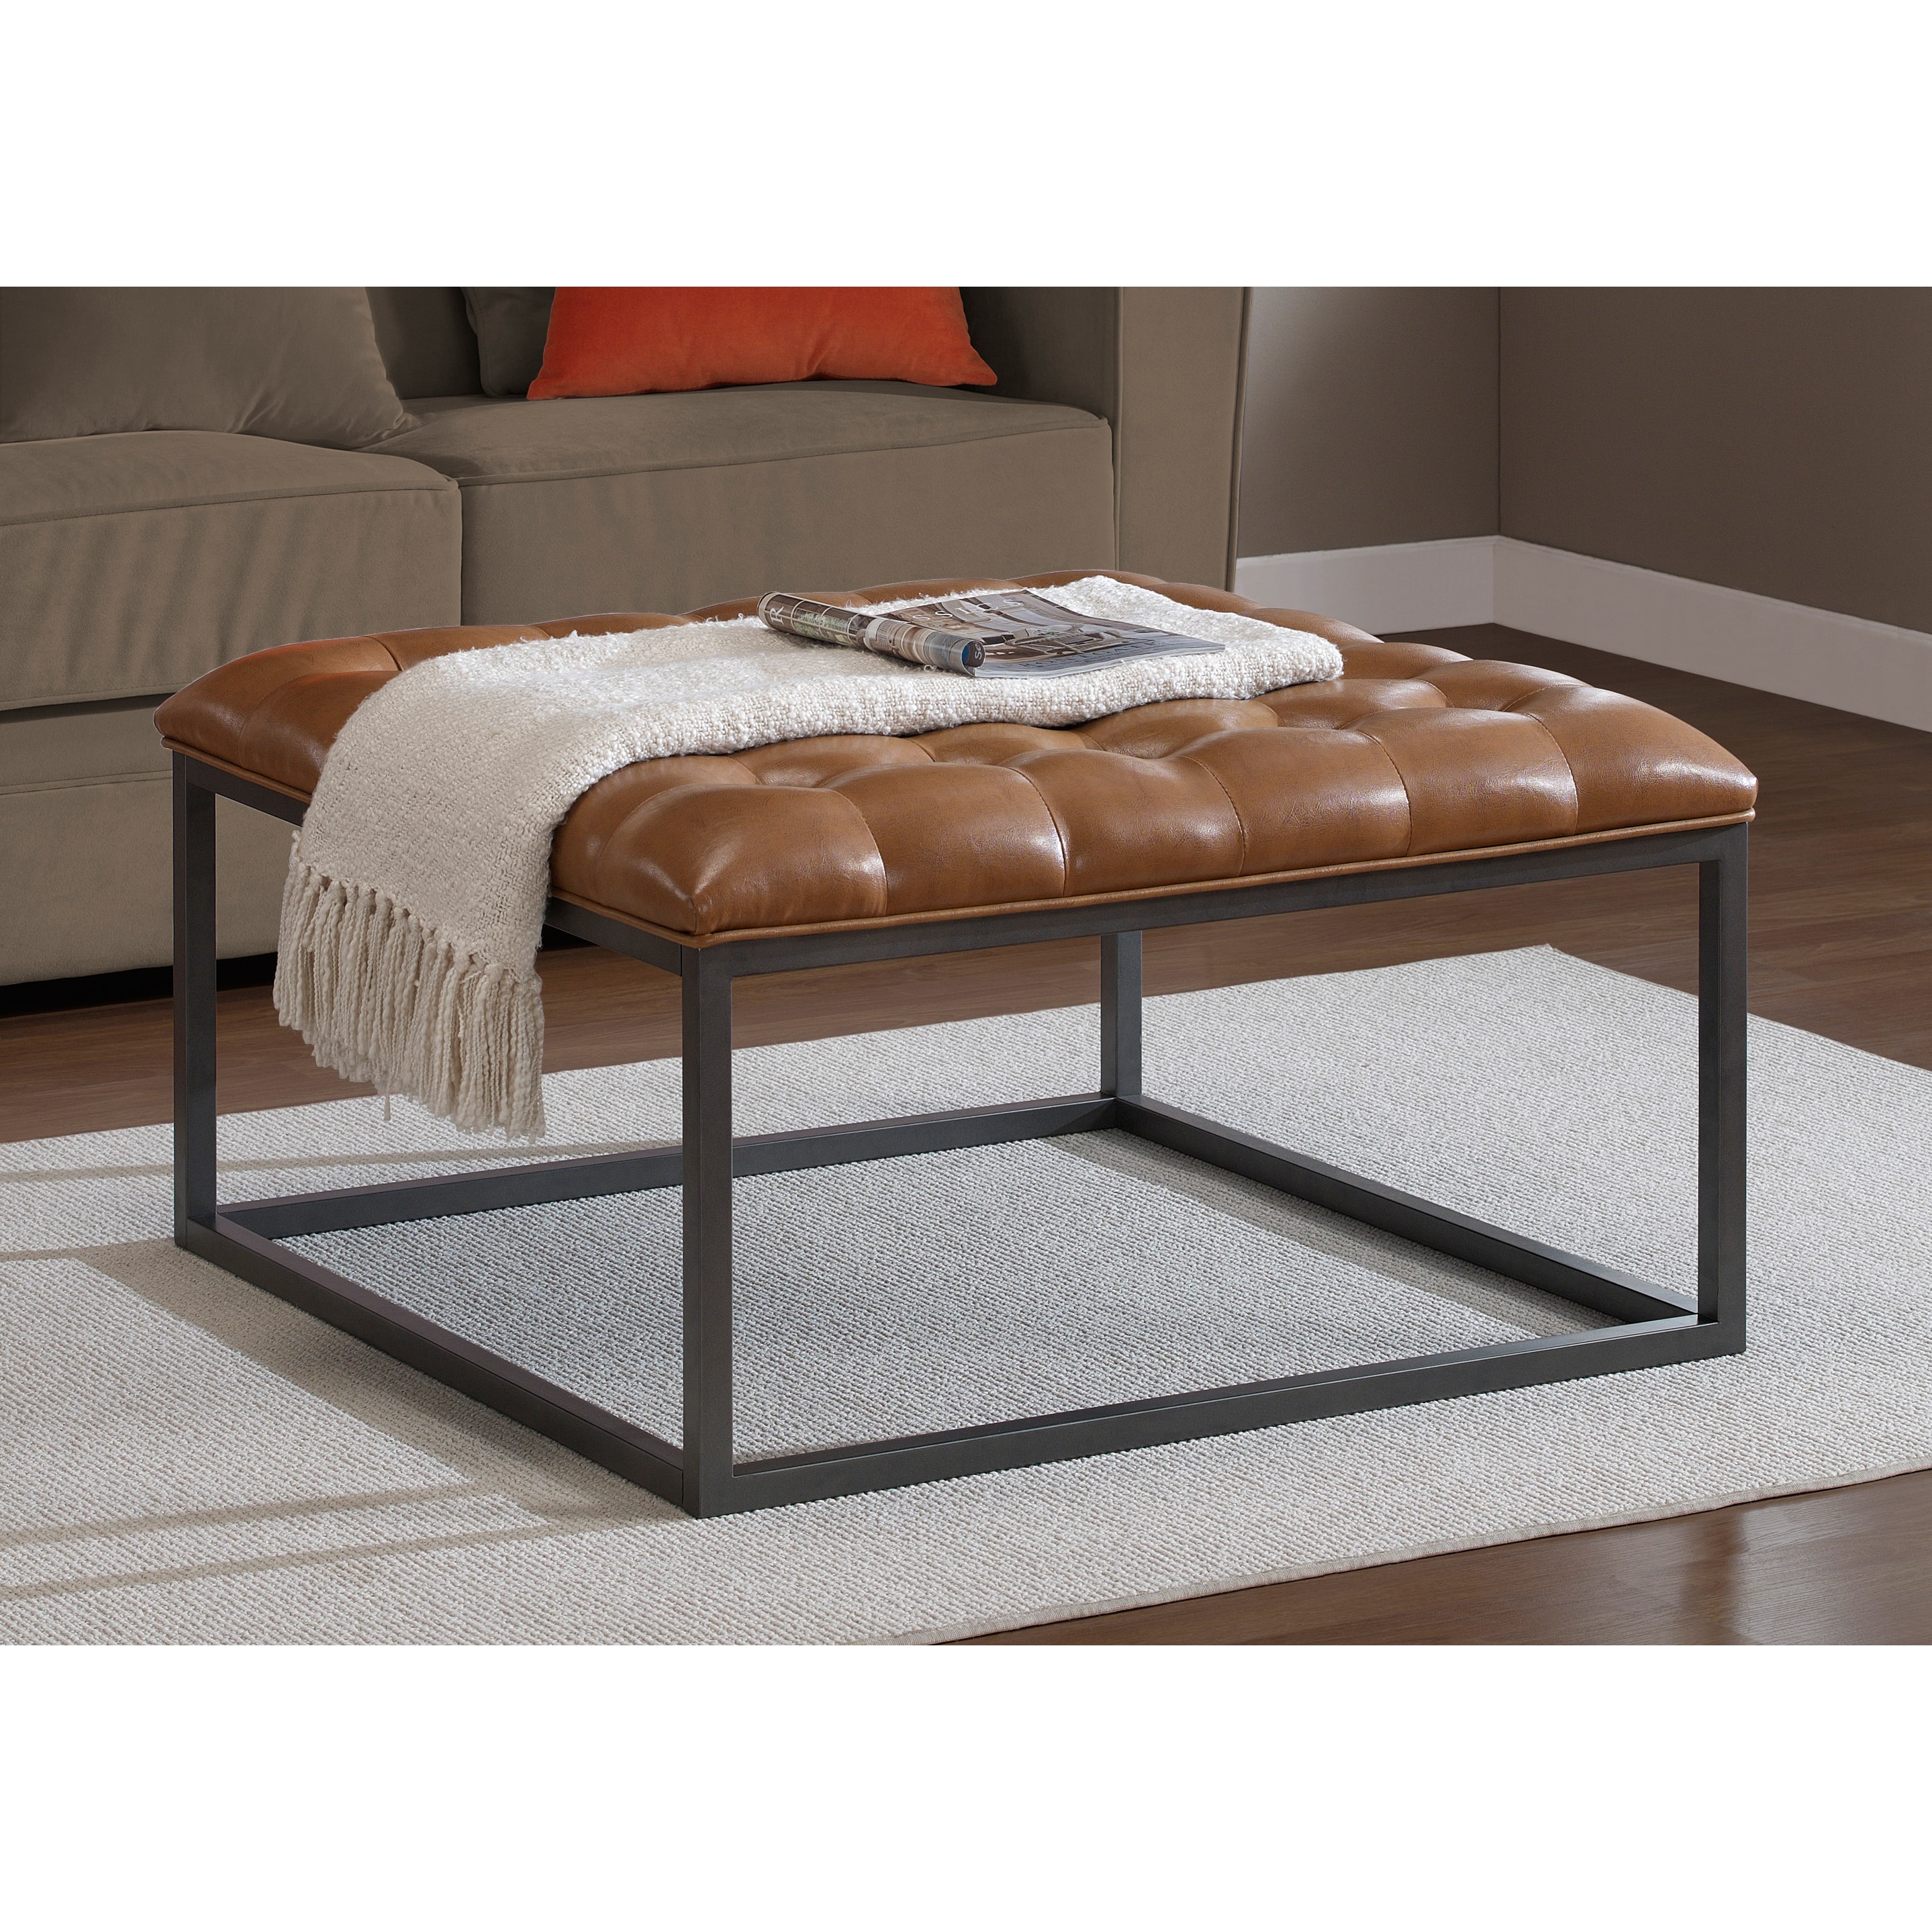 Healy Saddle Brown Leather Tufted Ottoman - Overstock Shopping - Great